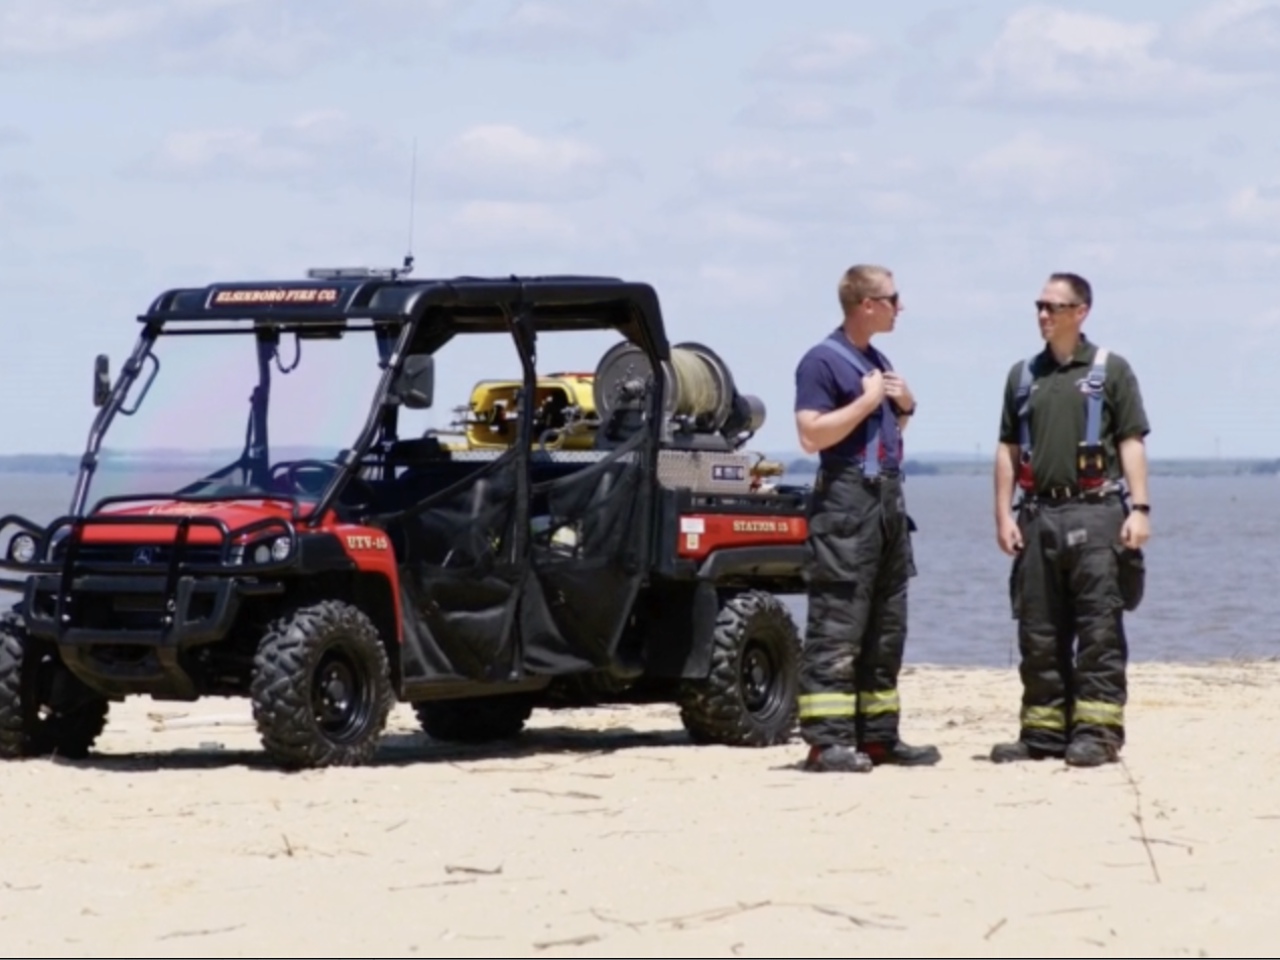 The Fire Department's utility terrain vehicle parked on a beach with two men standing nearby